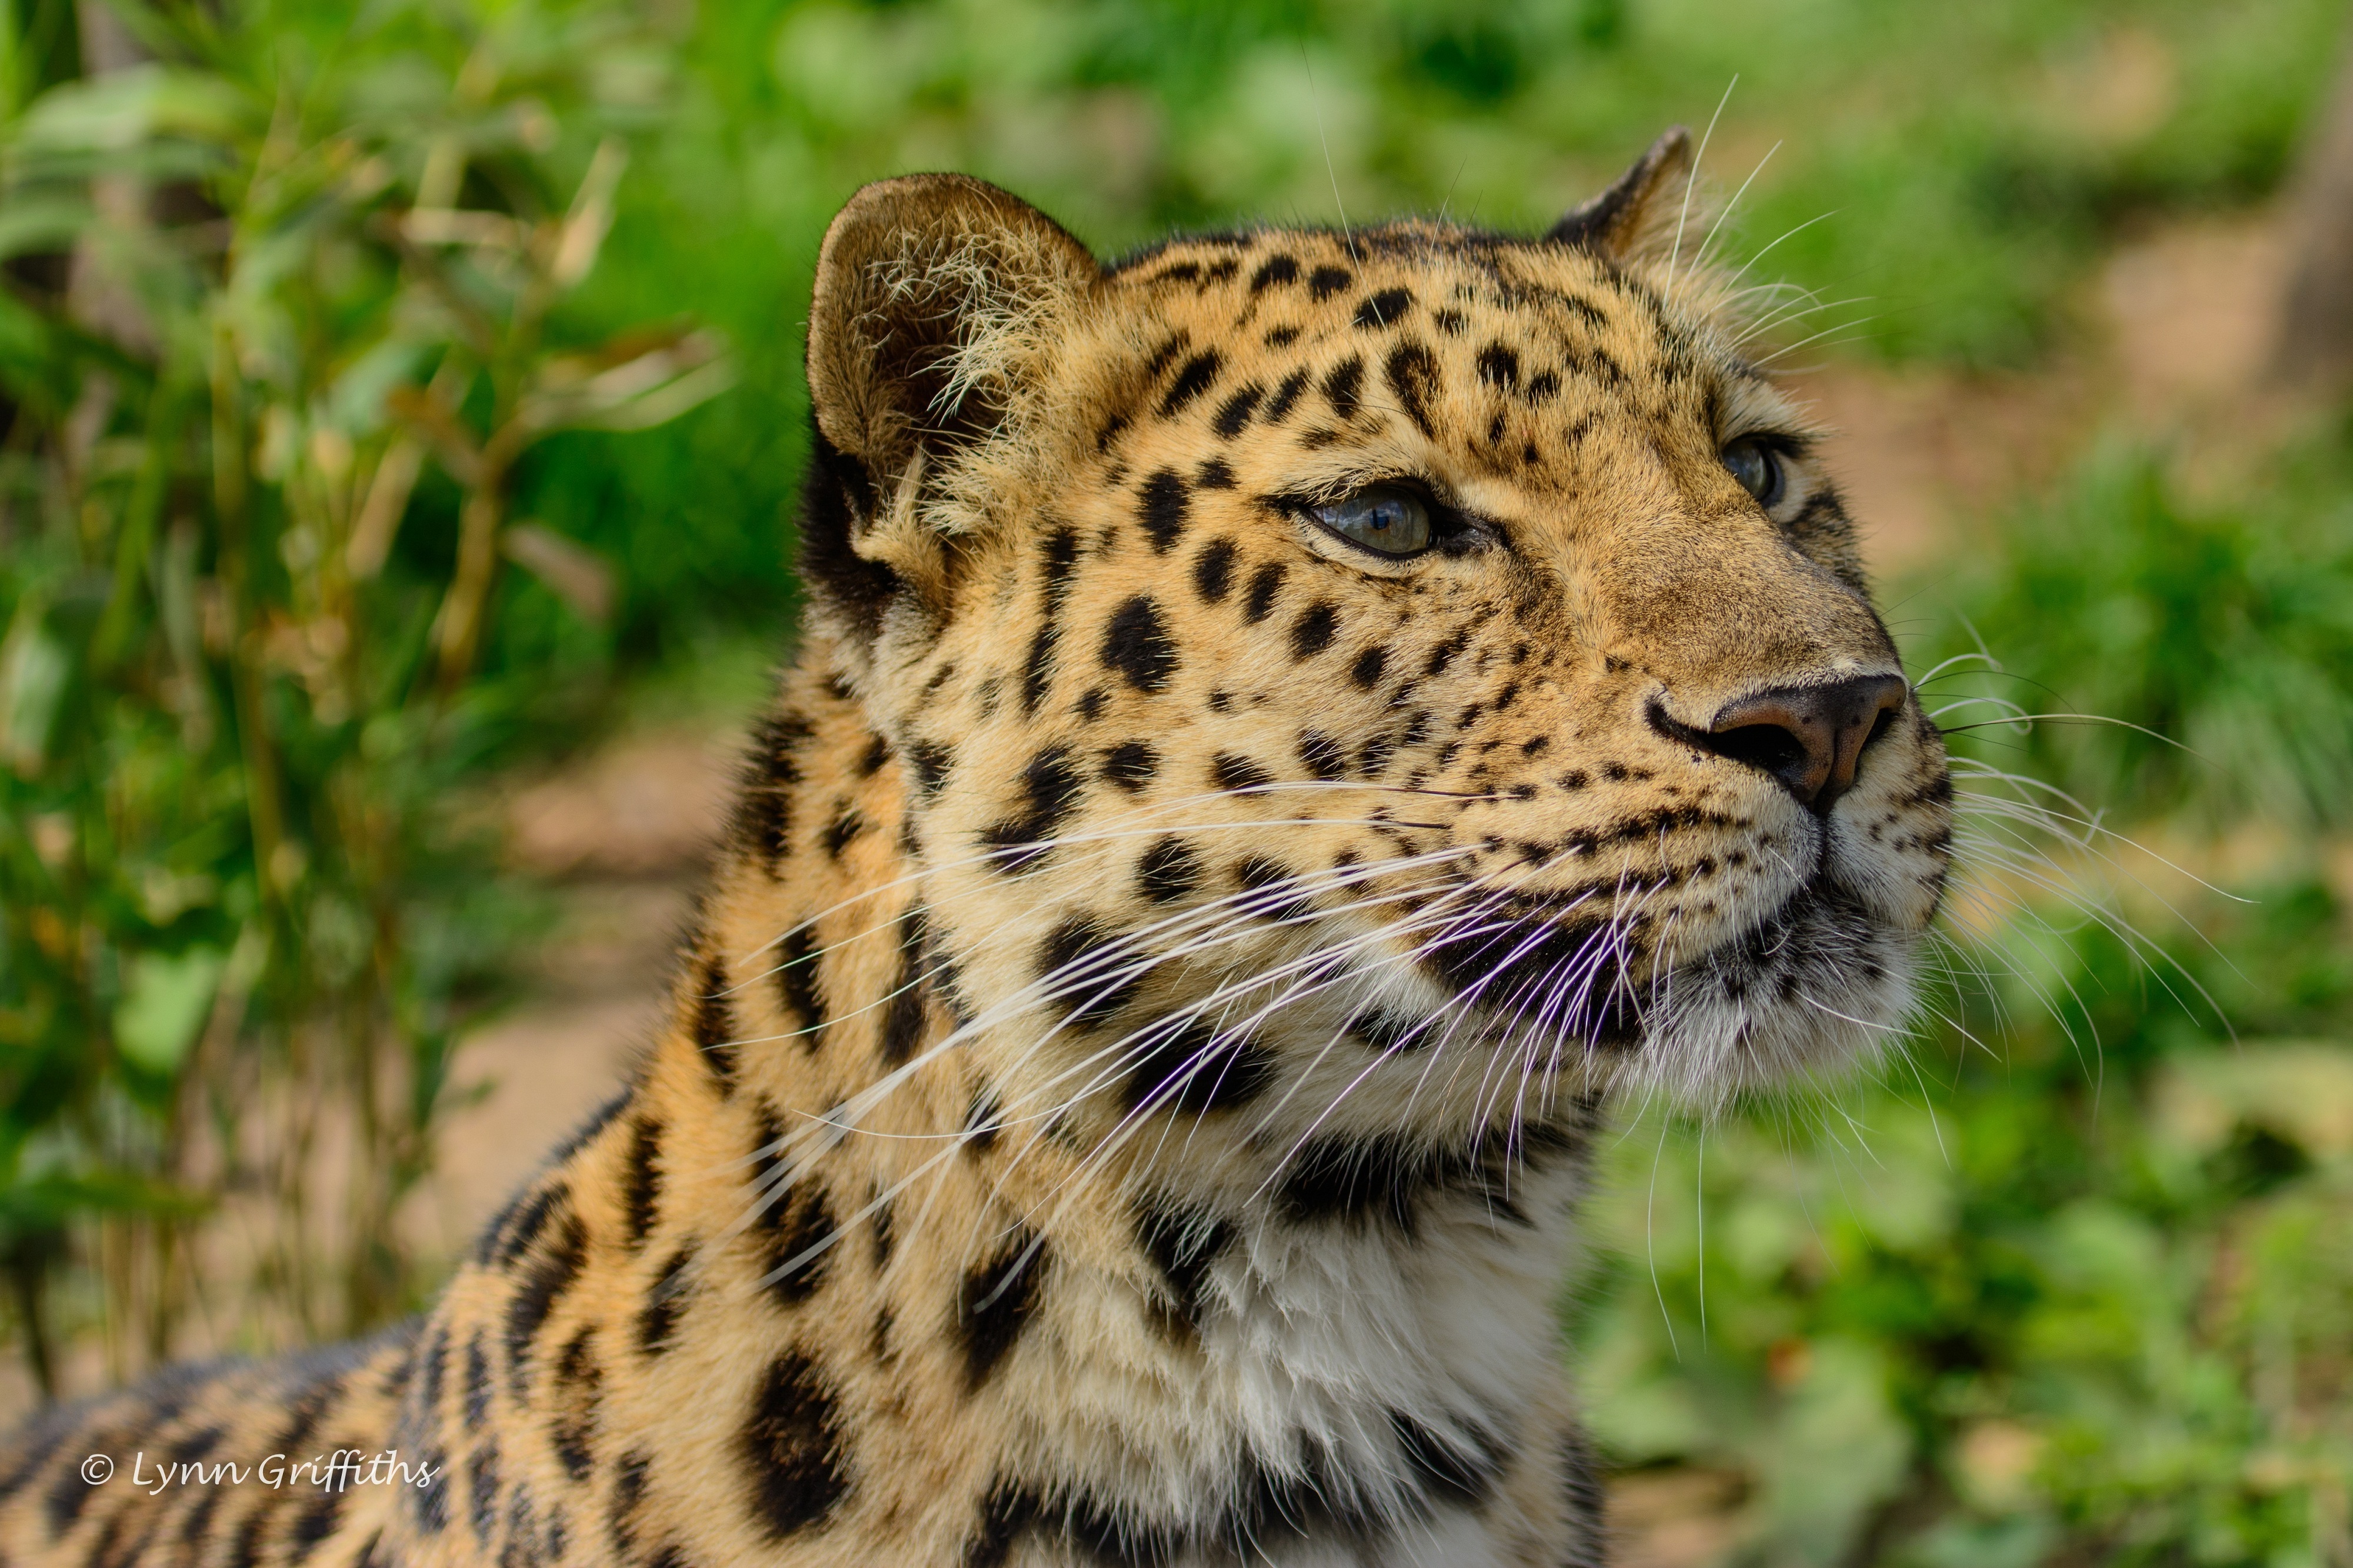 63380 download wallpaper animals, amur leopard, muzzle, predator, wild cat, wildcat screensavers and pictures for free